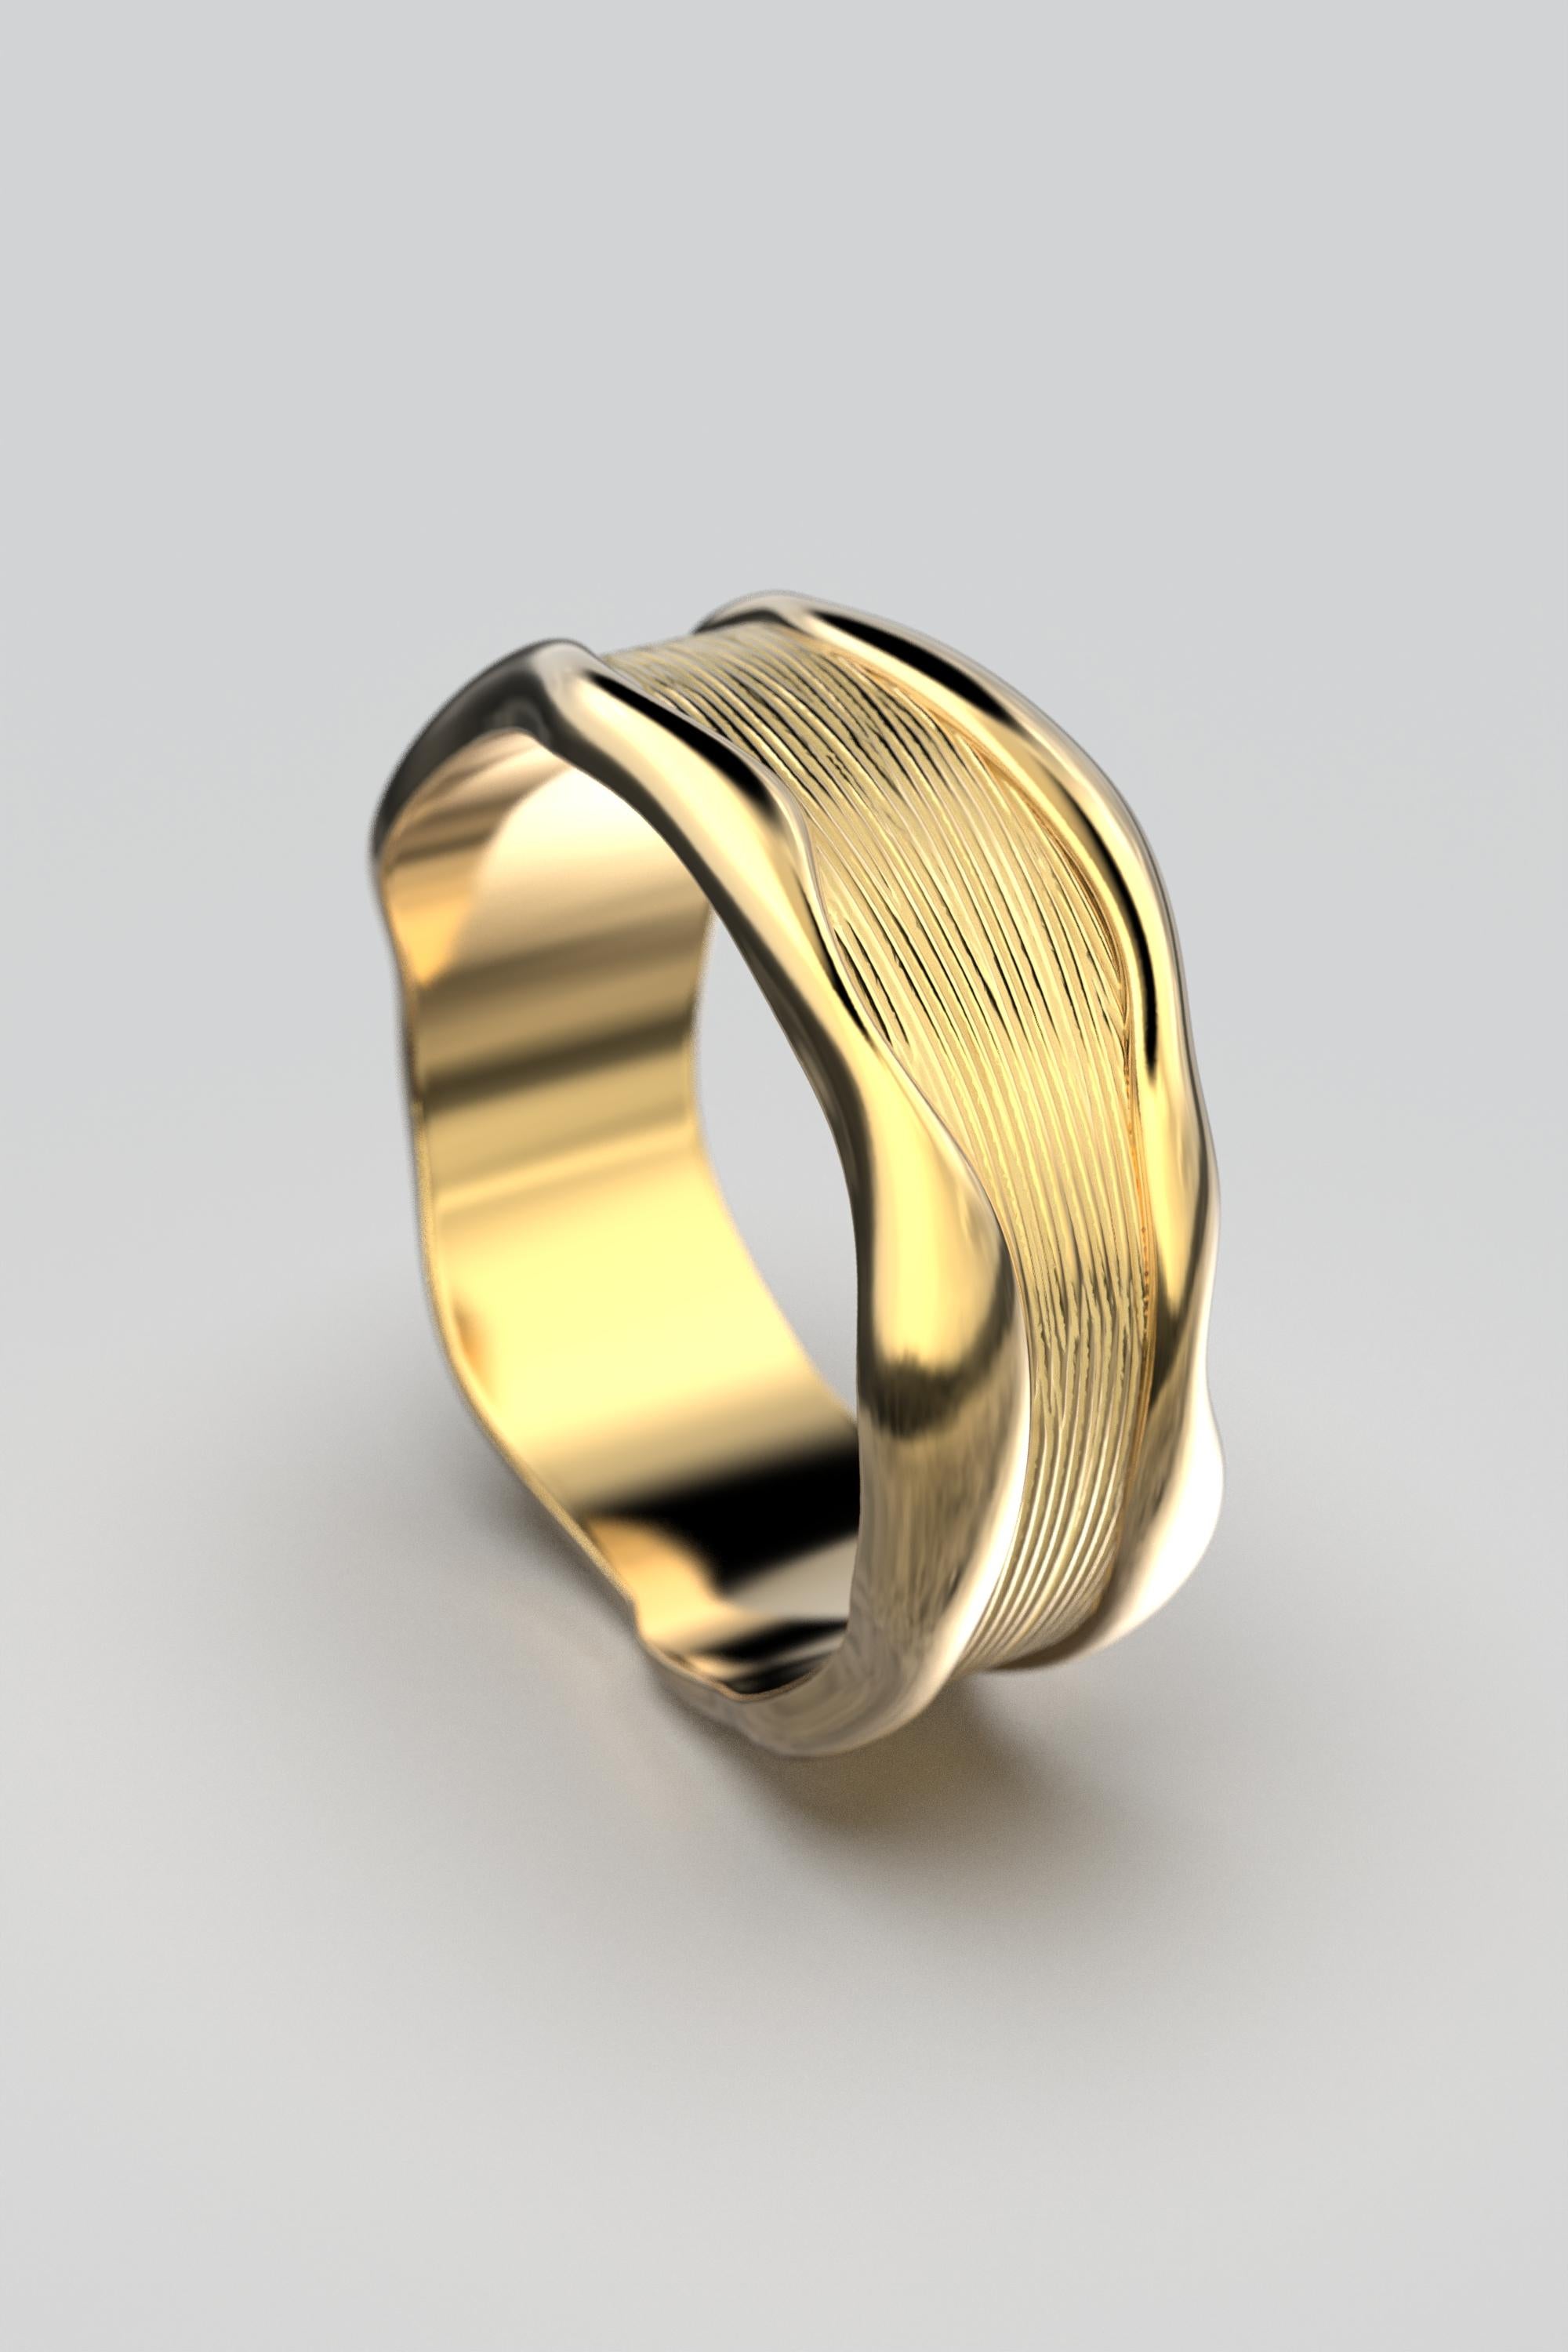 For Sale:  Hand-Engraved Unisex 18k Gold Band Ring Made in Italy by Oltremare Gioielli 2